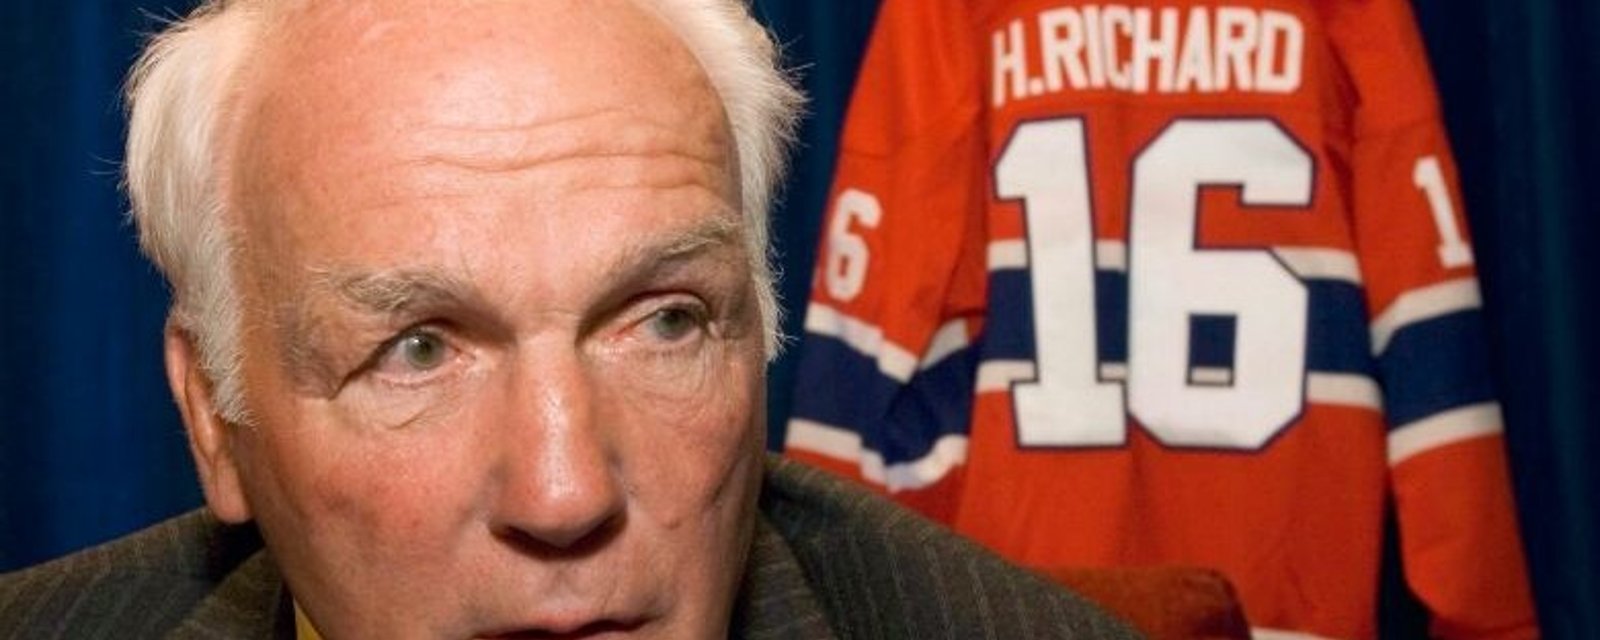 Henri Richard died with only 1 Stanley Cup ring due to disgraceful tragedy.